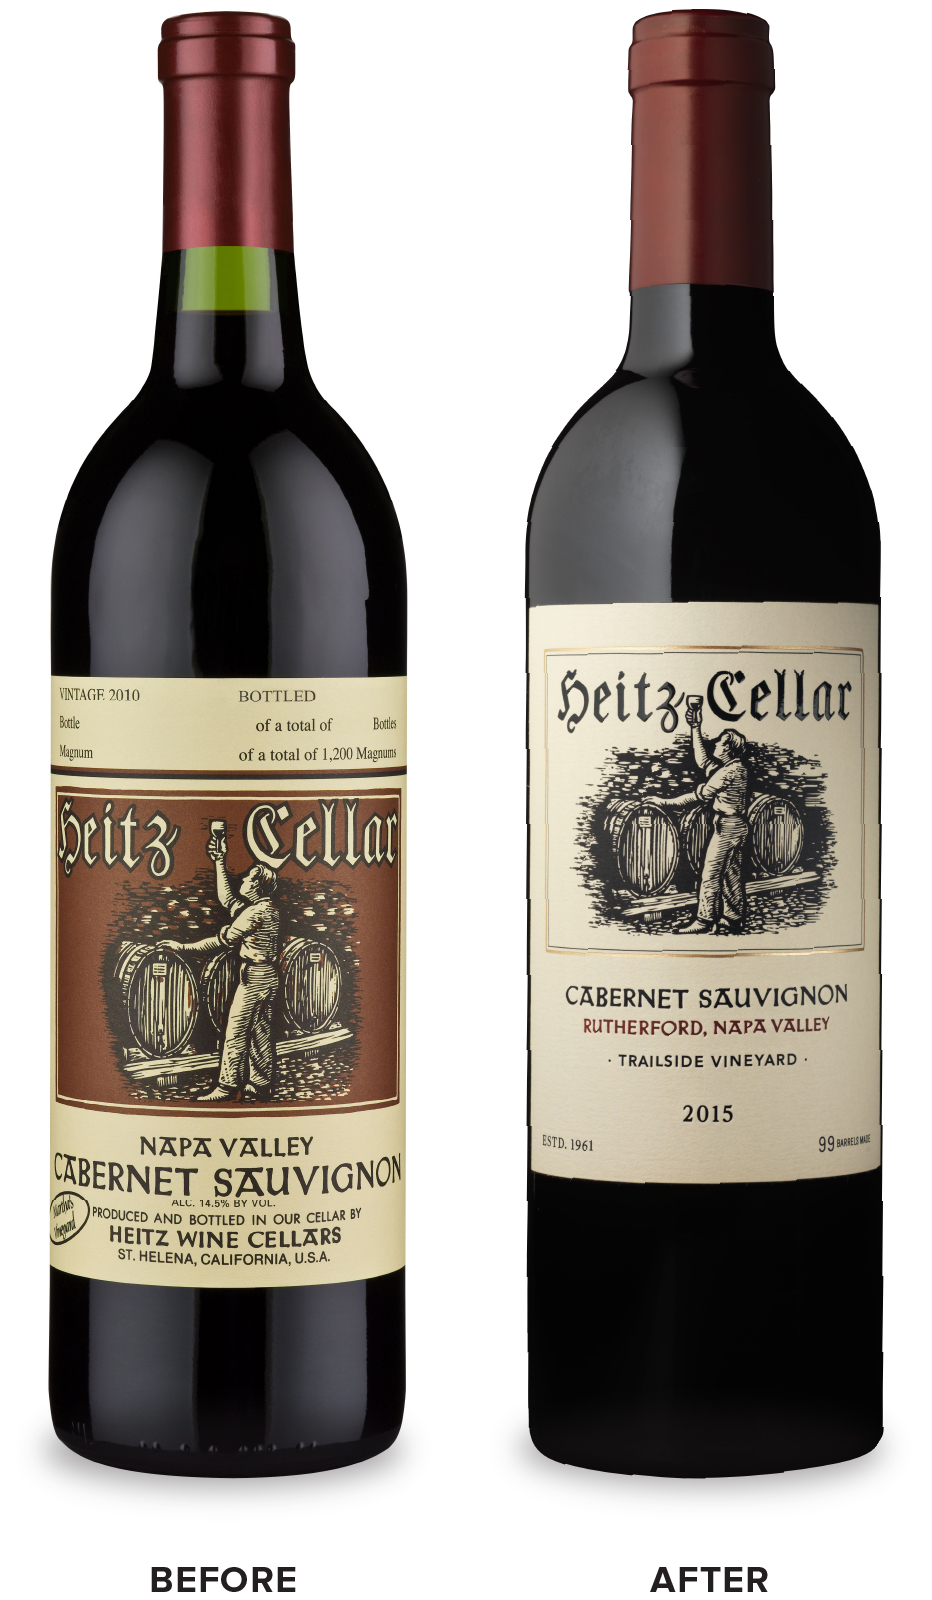 Heitz Cellar Vineyard Designate Wine Packaging Before Redesign on Left & After on Right